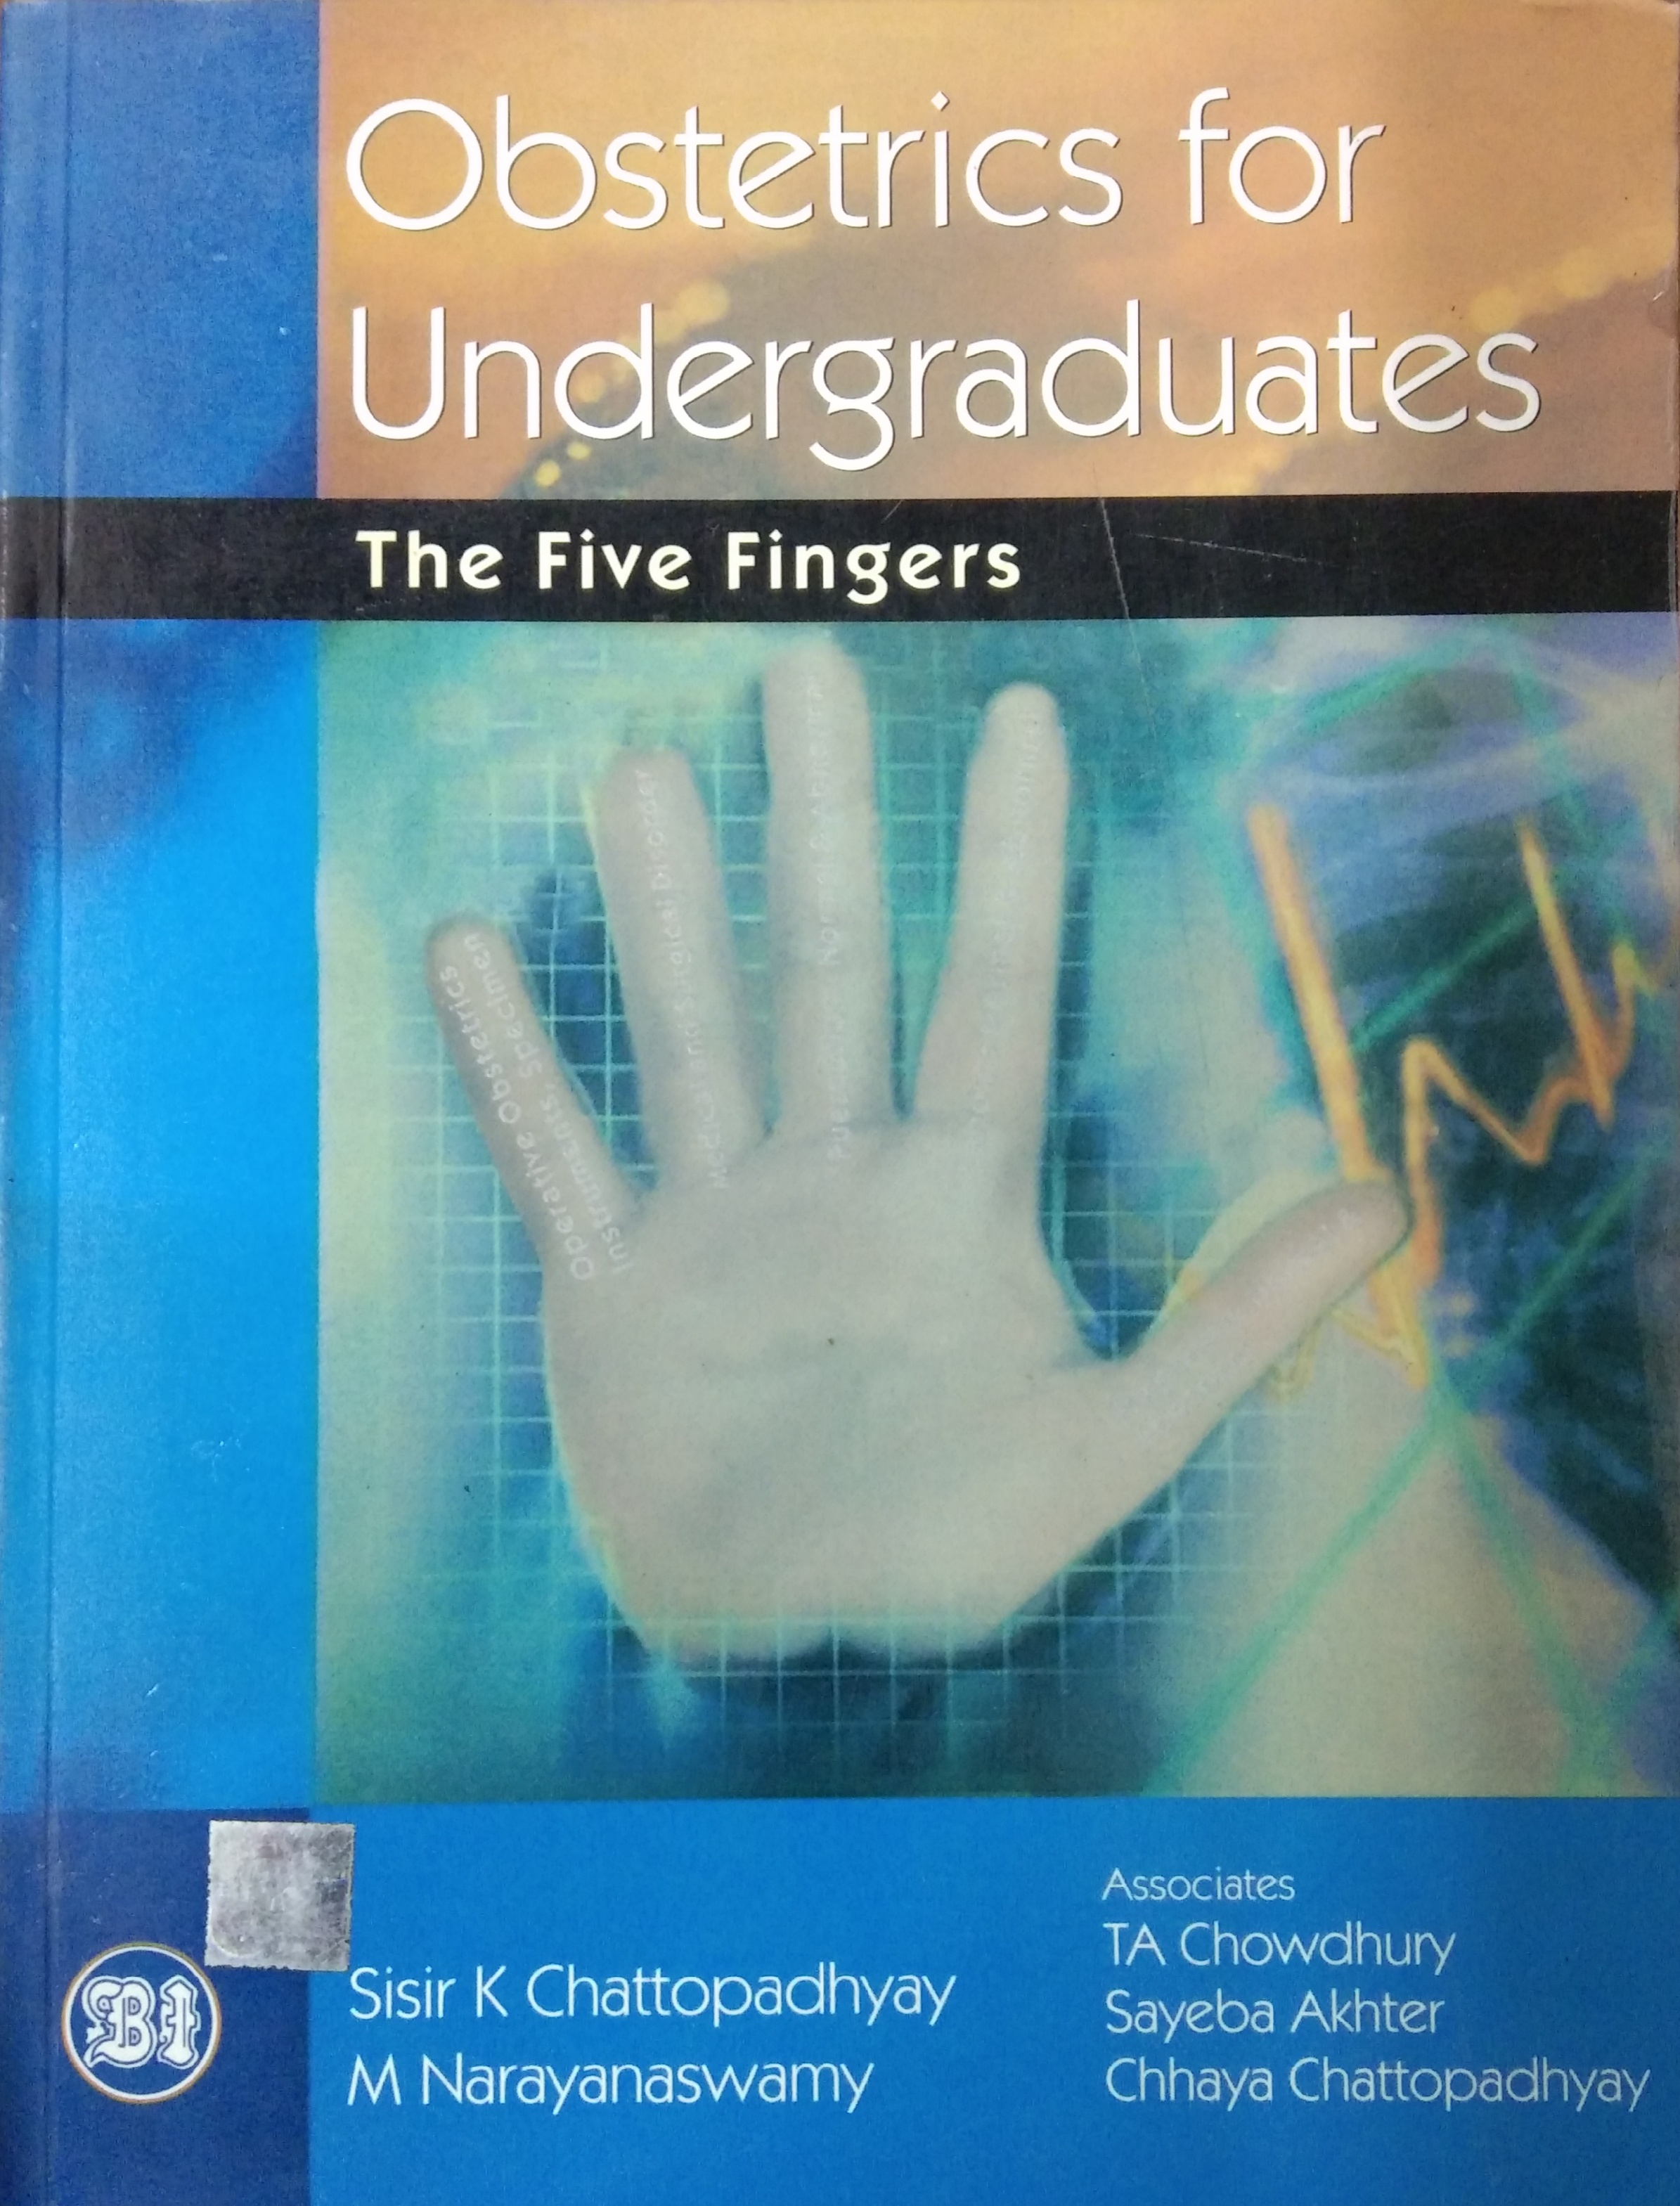 

exclusive-publishers/other/obstetrics-for-undergraduates-the-five-fingures--9788172252281